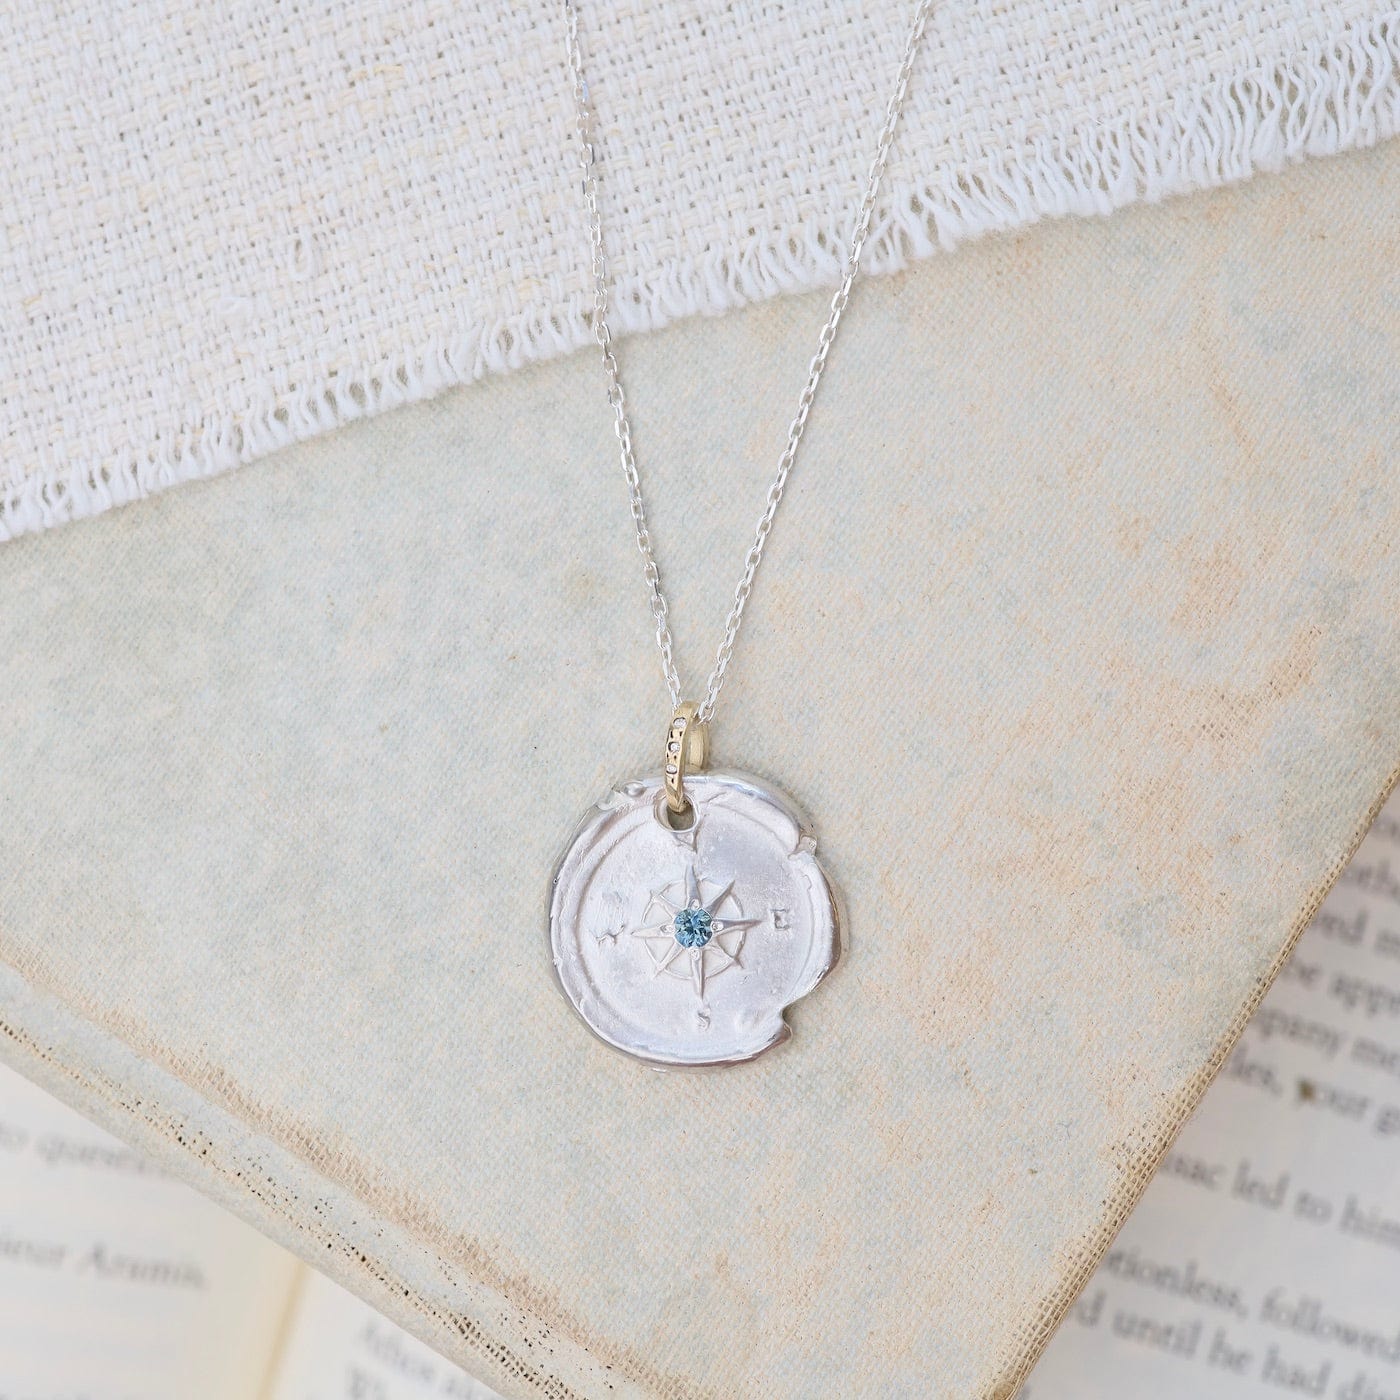 NKL-14K Sterling Silver & 14k Gold Compass Necklace with Montana Sapphire